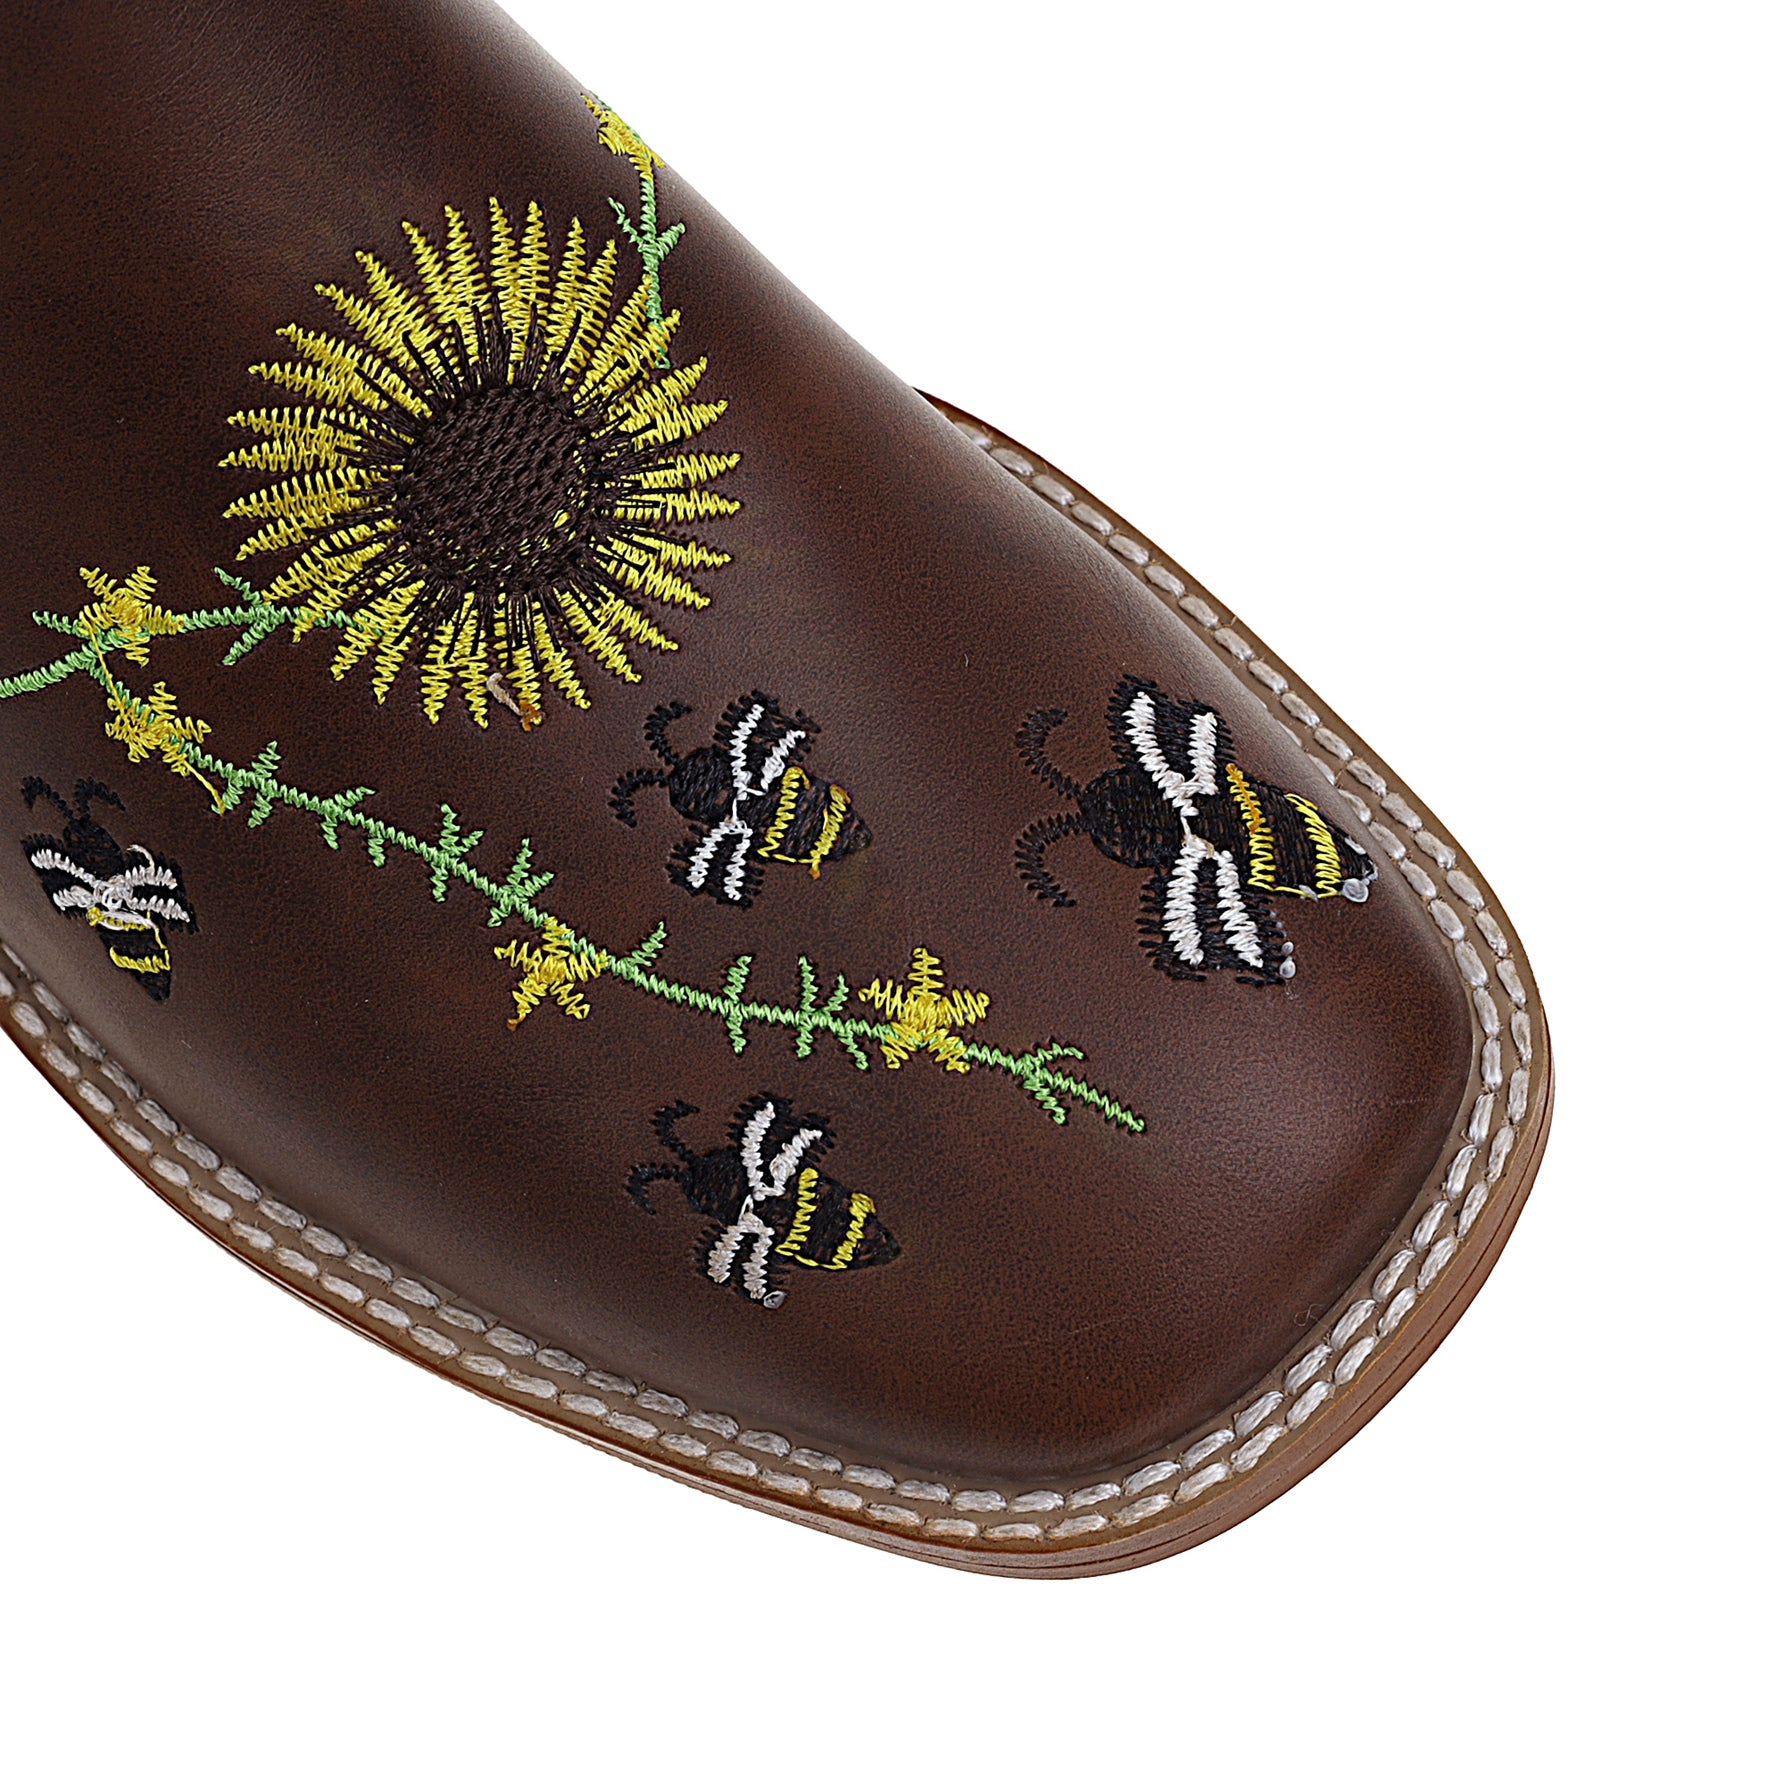 Bigsizeheels Western vintage Sunflowers embroidered boots - Brown freeshipping - bigsizeheel®-size5-size15 -All Plus Sizes Available!